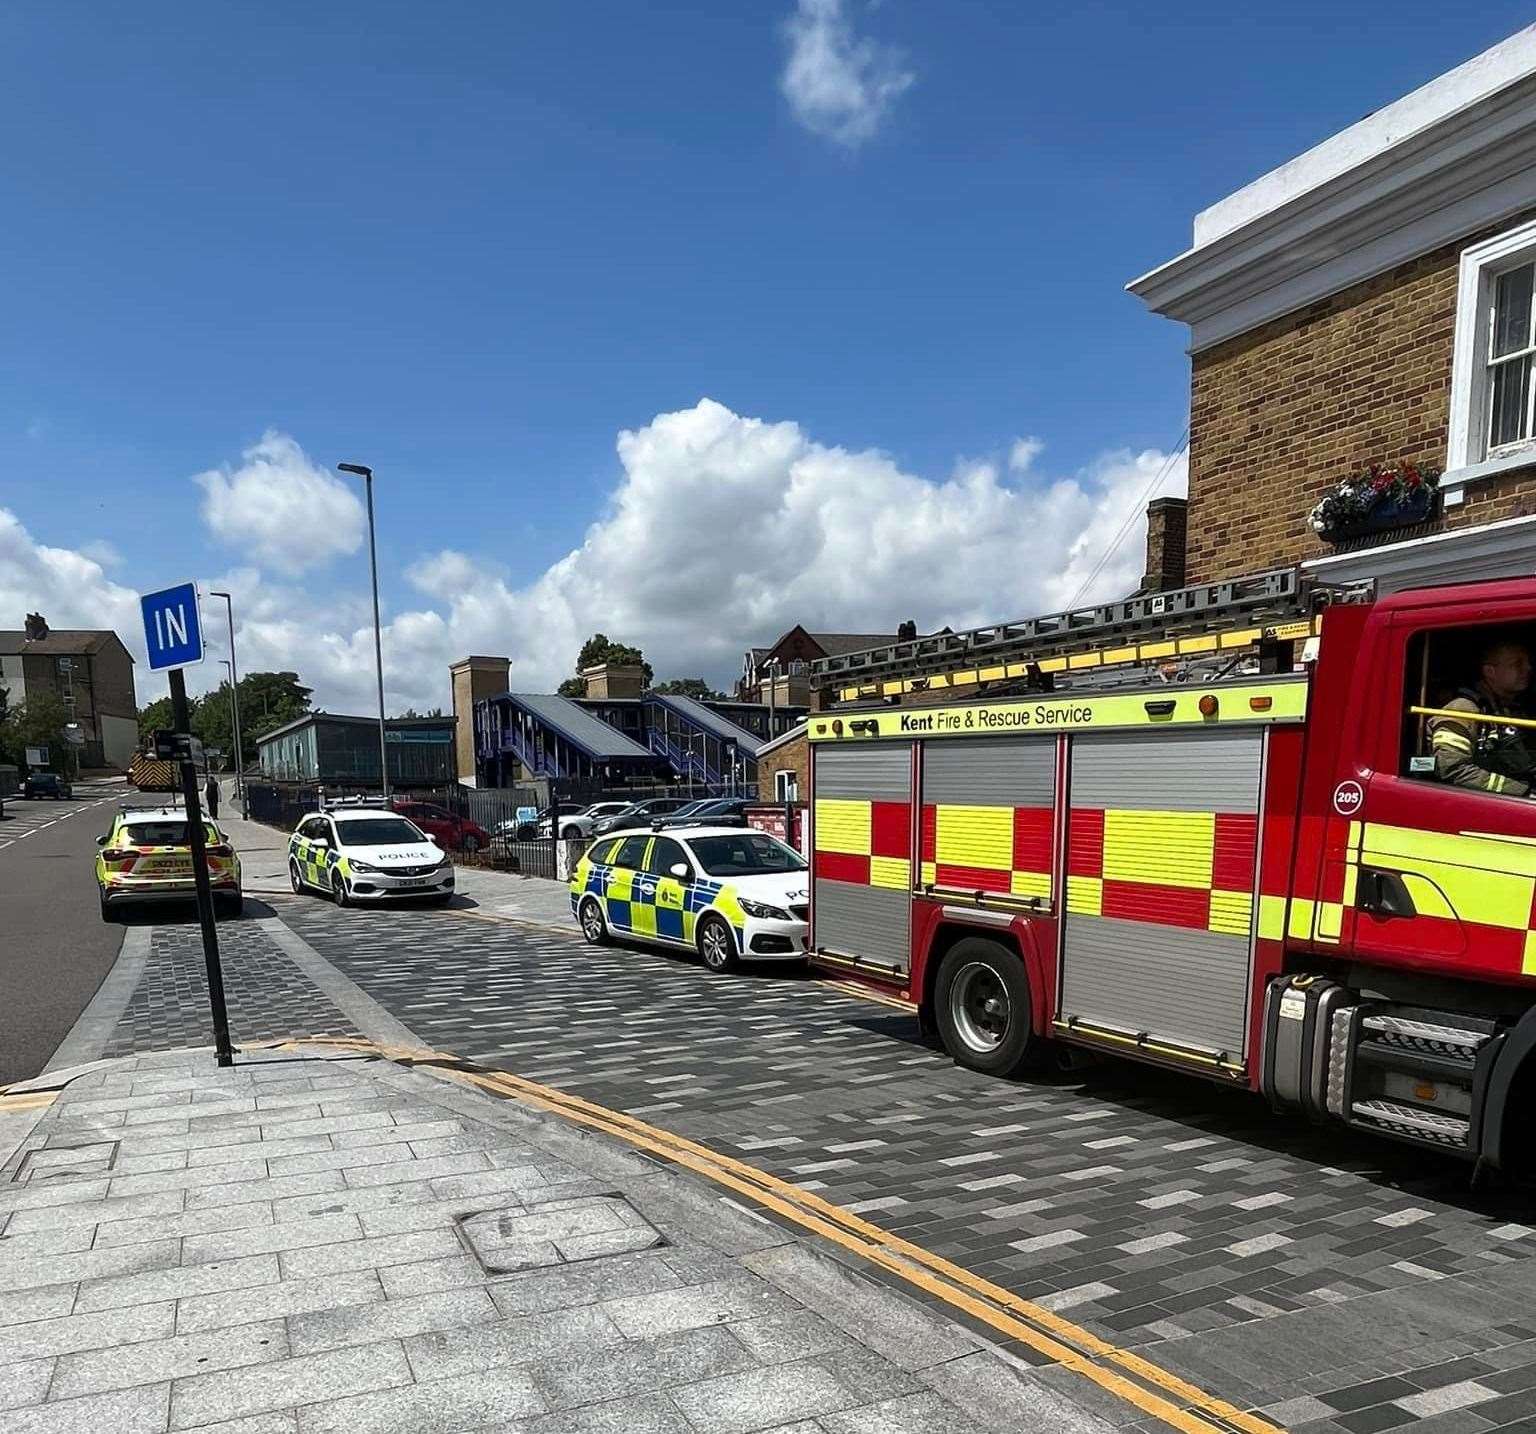 Gravesend railway station was evacuated after a fire broke out near the tracks. Picture: Callum Skinner